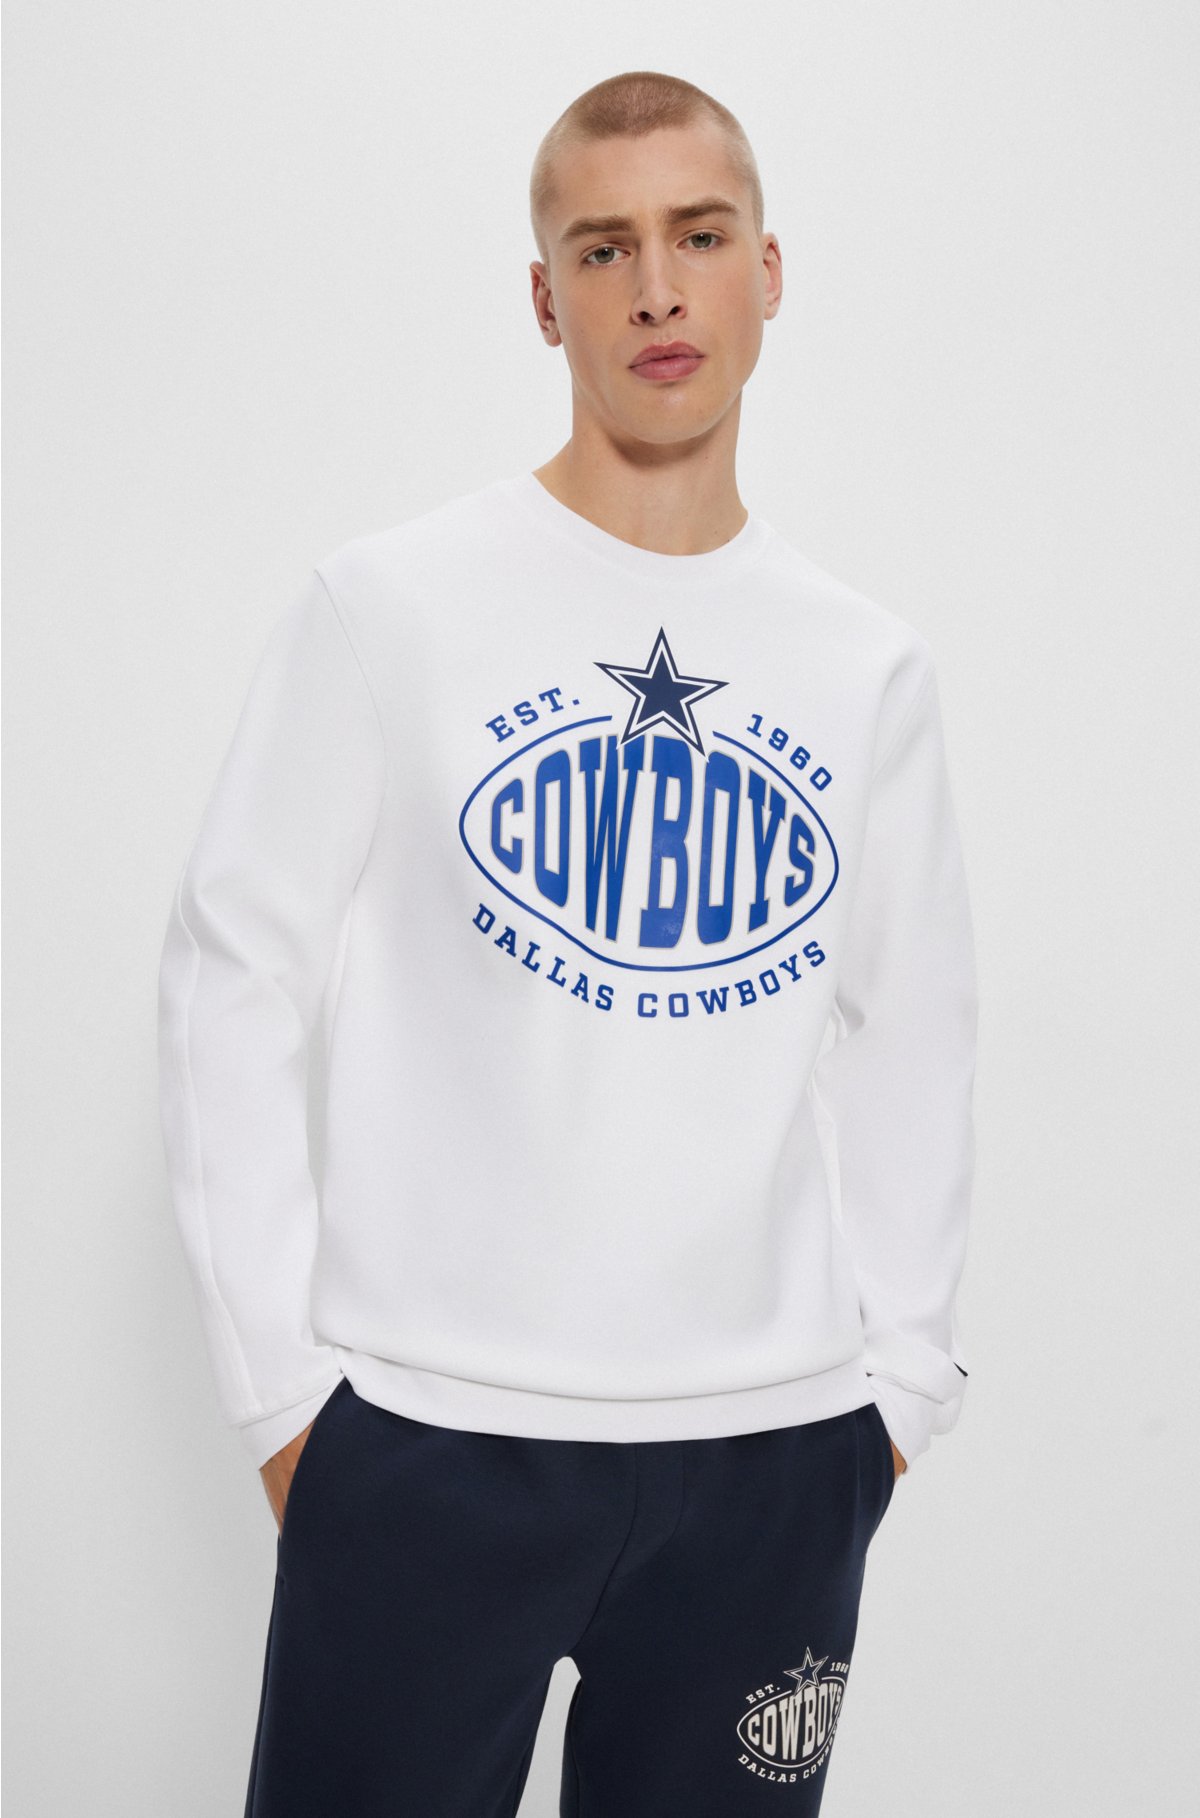 Dallas Cowboys NFL TEAM INSPIRED LONG SLEEVE SHIRT Mitchell & Ness